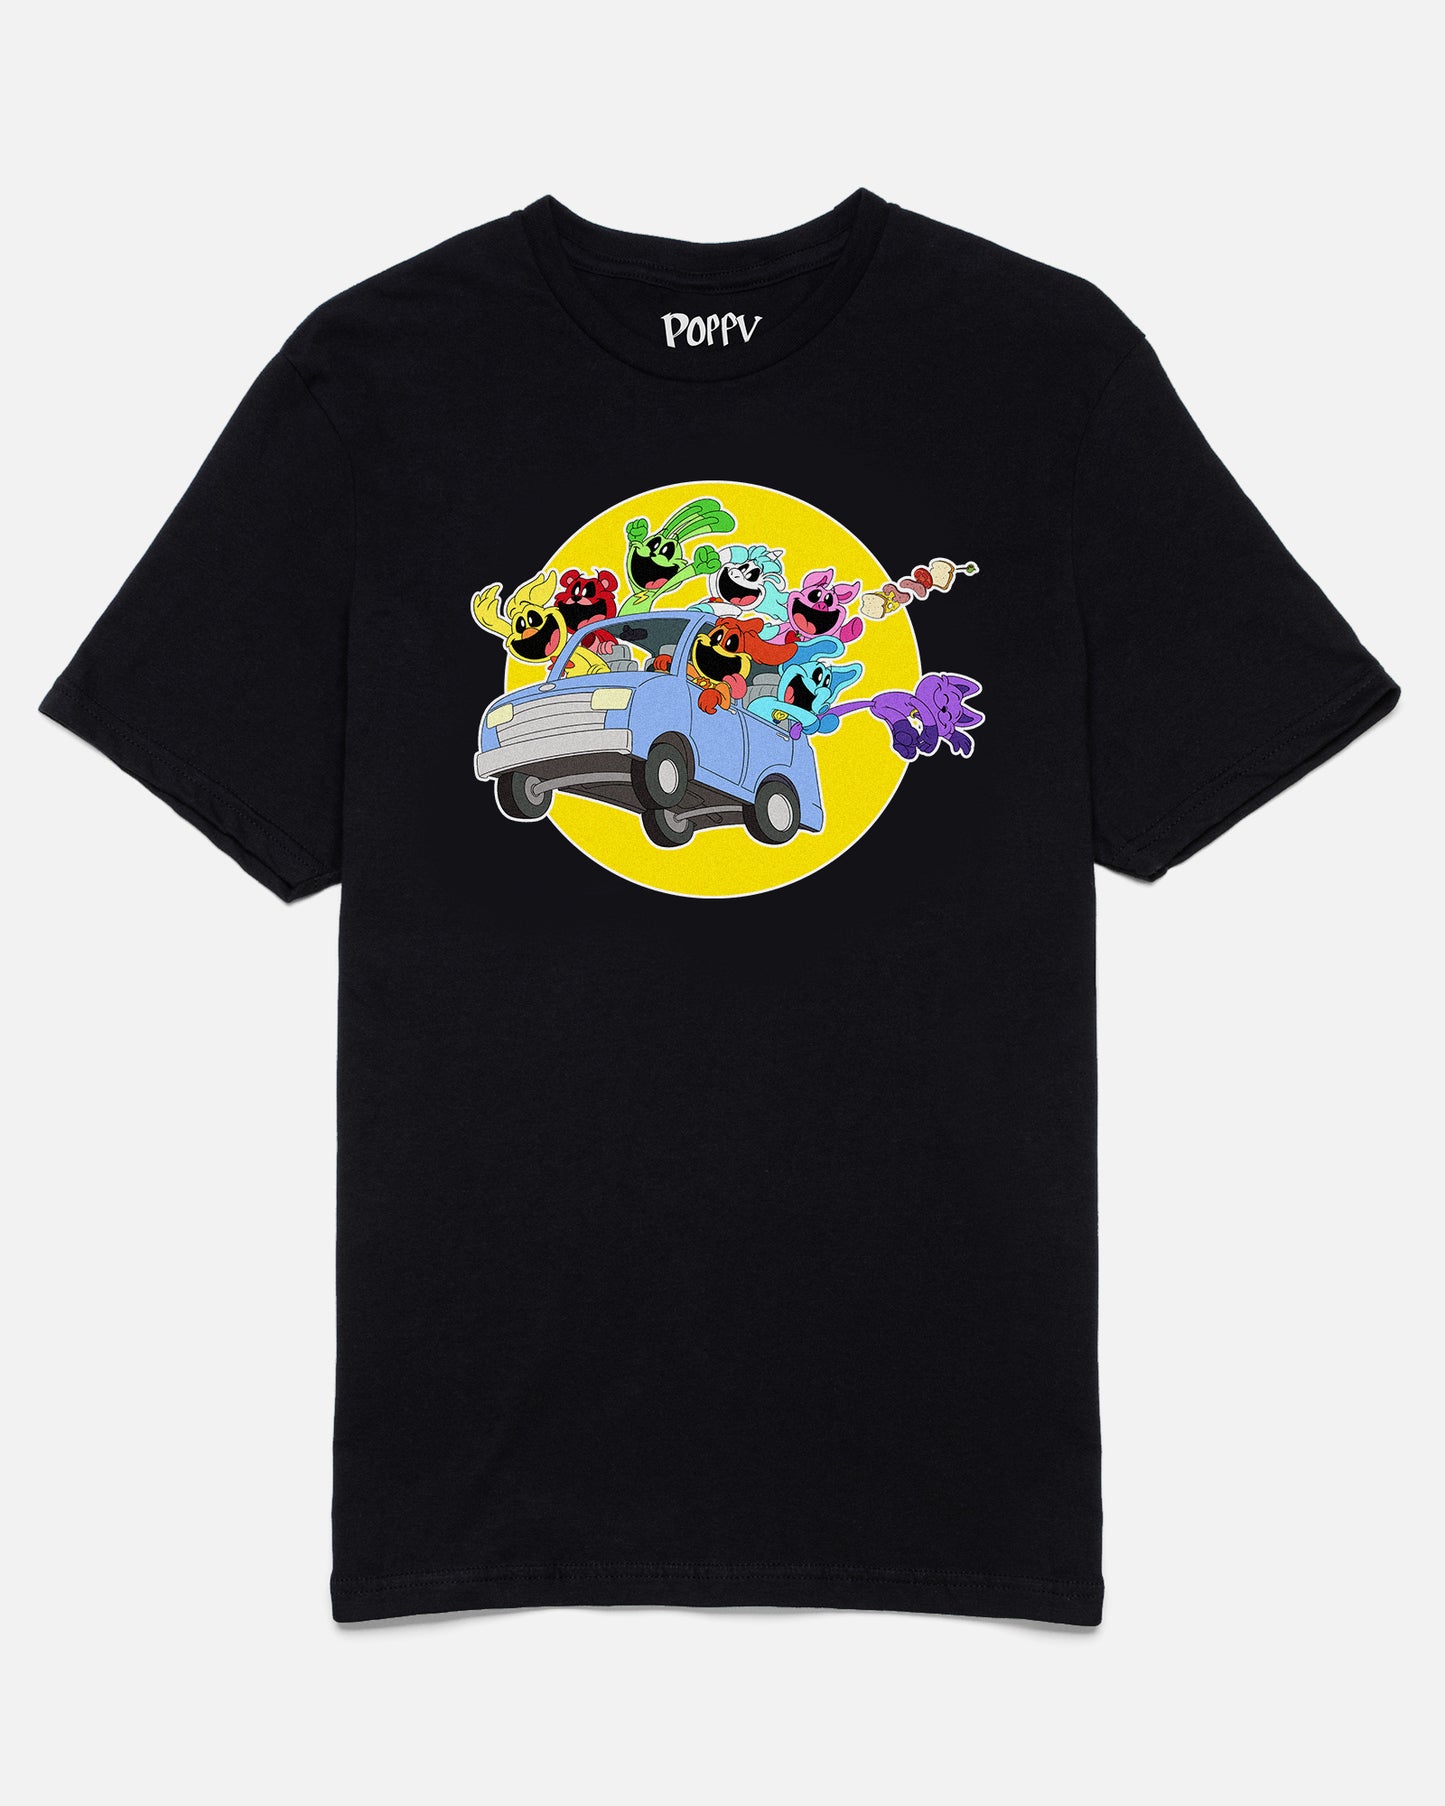 smiling critters tee. image: all the smiling critters in a car. kickinchicken, bobby bearhug, hoppy hopscotch, craftycorn, pickypiggy trying to catch a sandwich, bubba bubbaphant holding catnaps tail as he flys out the car, dogday driving.